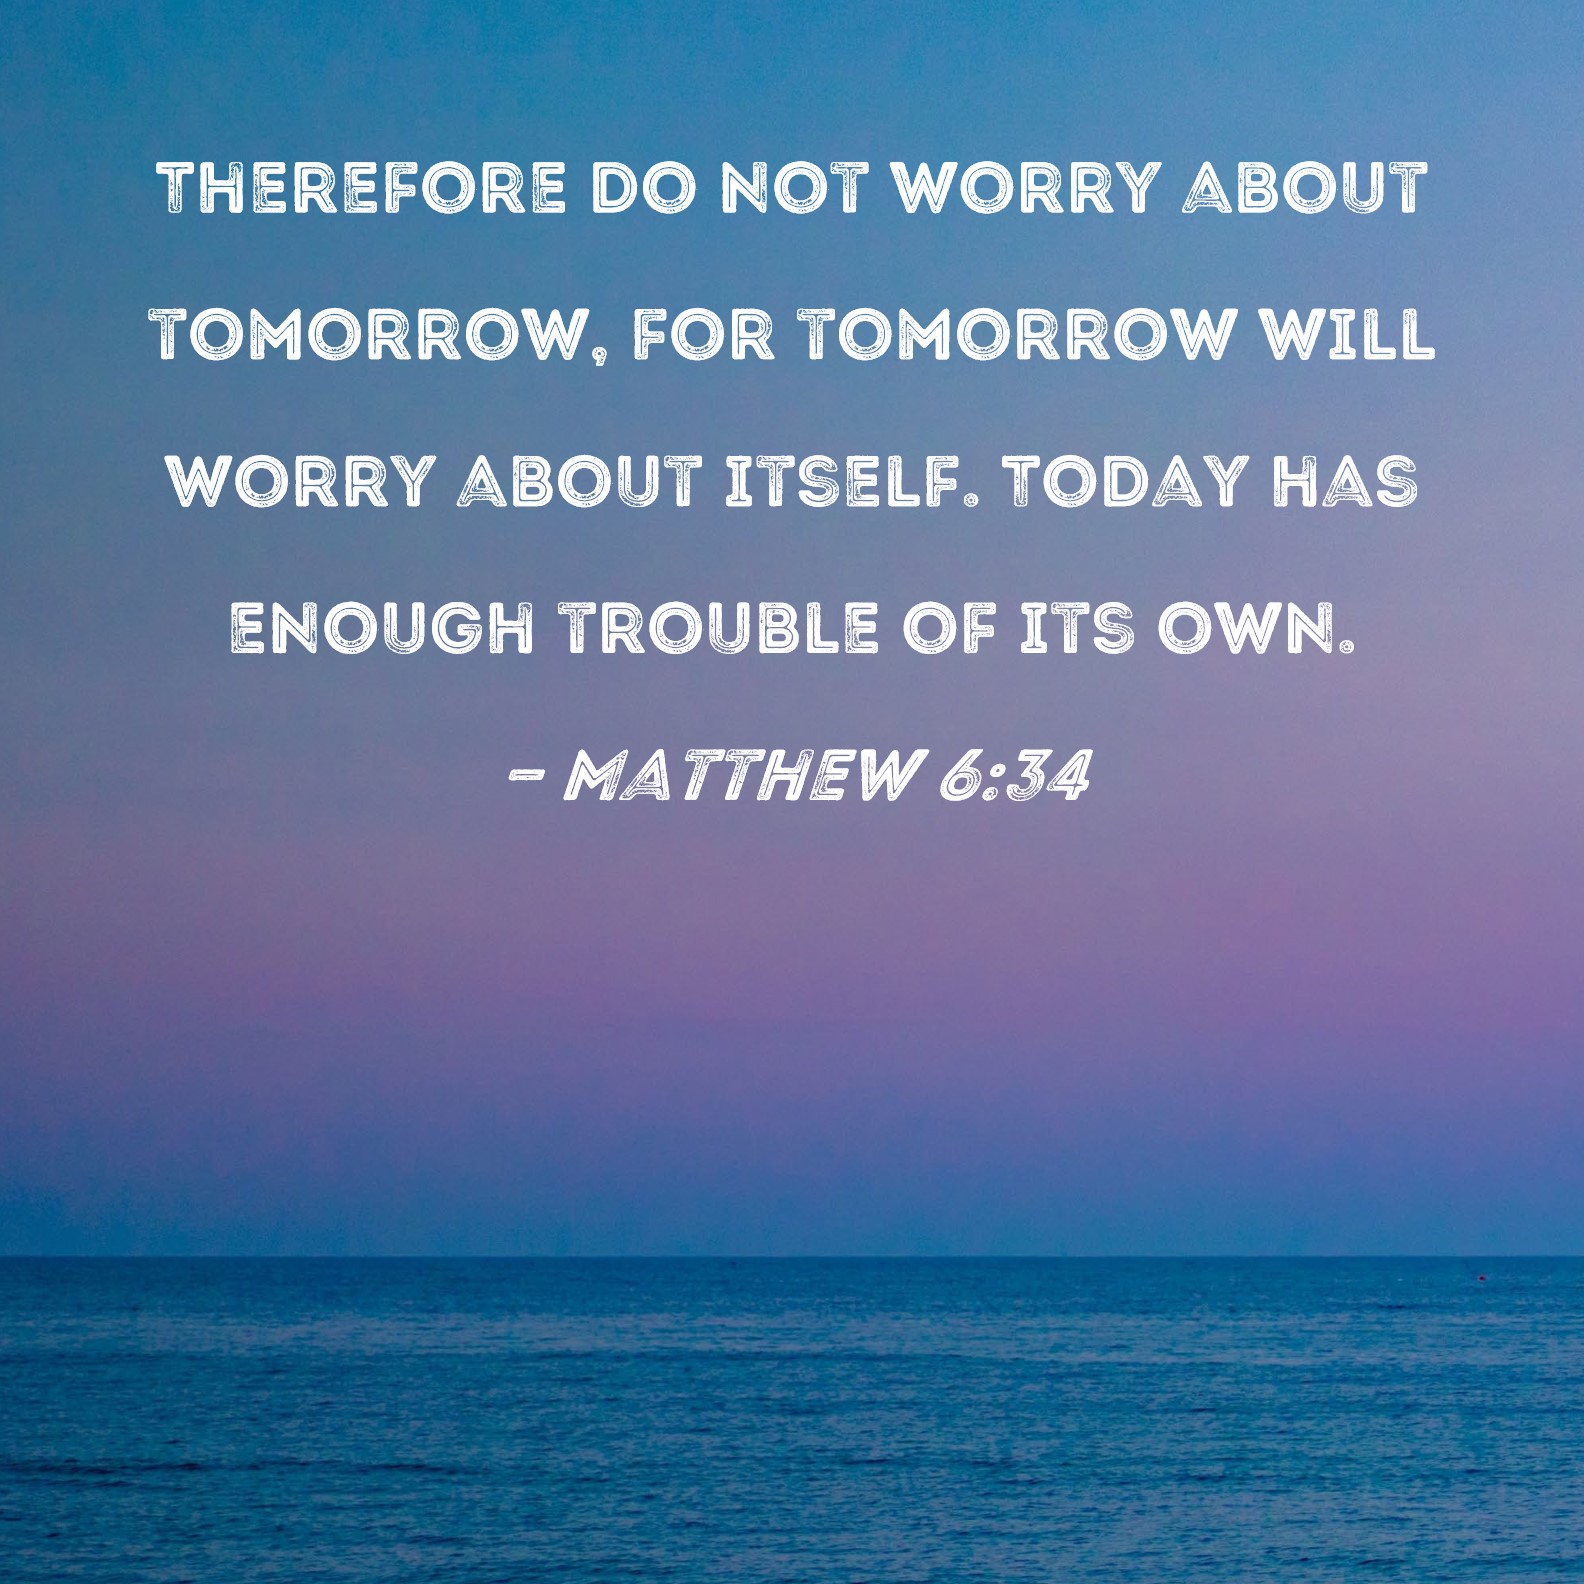 Matthew 6_34 (NIV)Therefore do not worry about tomorrow, for